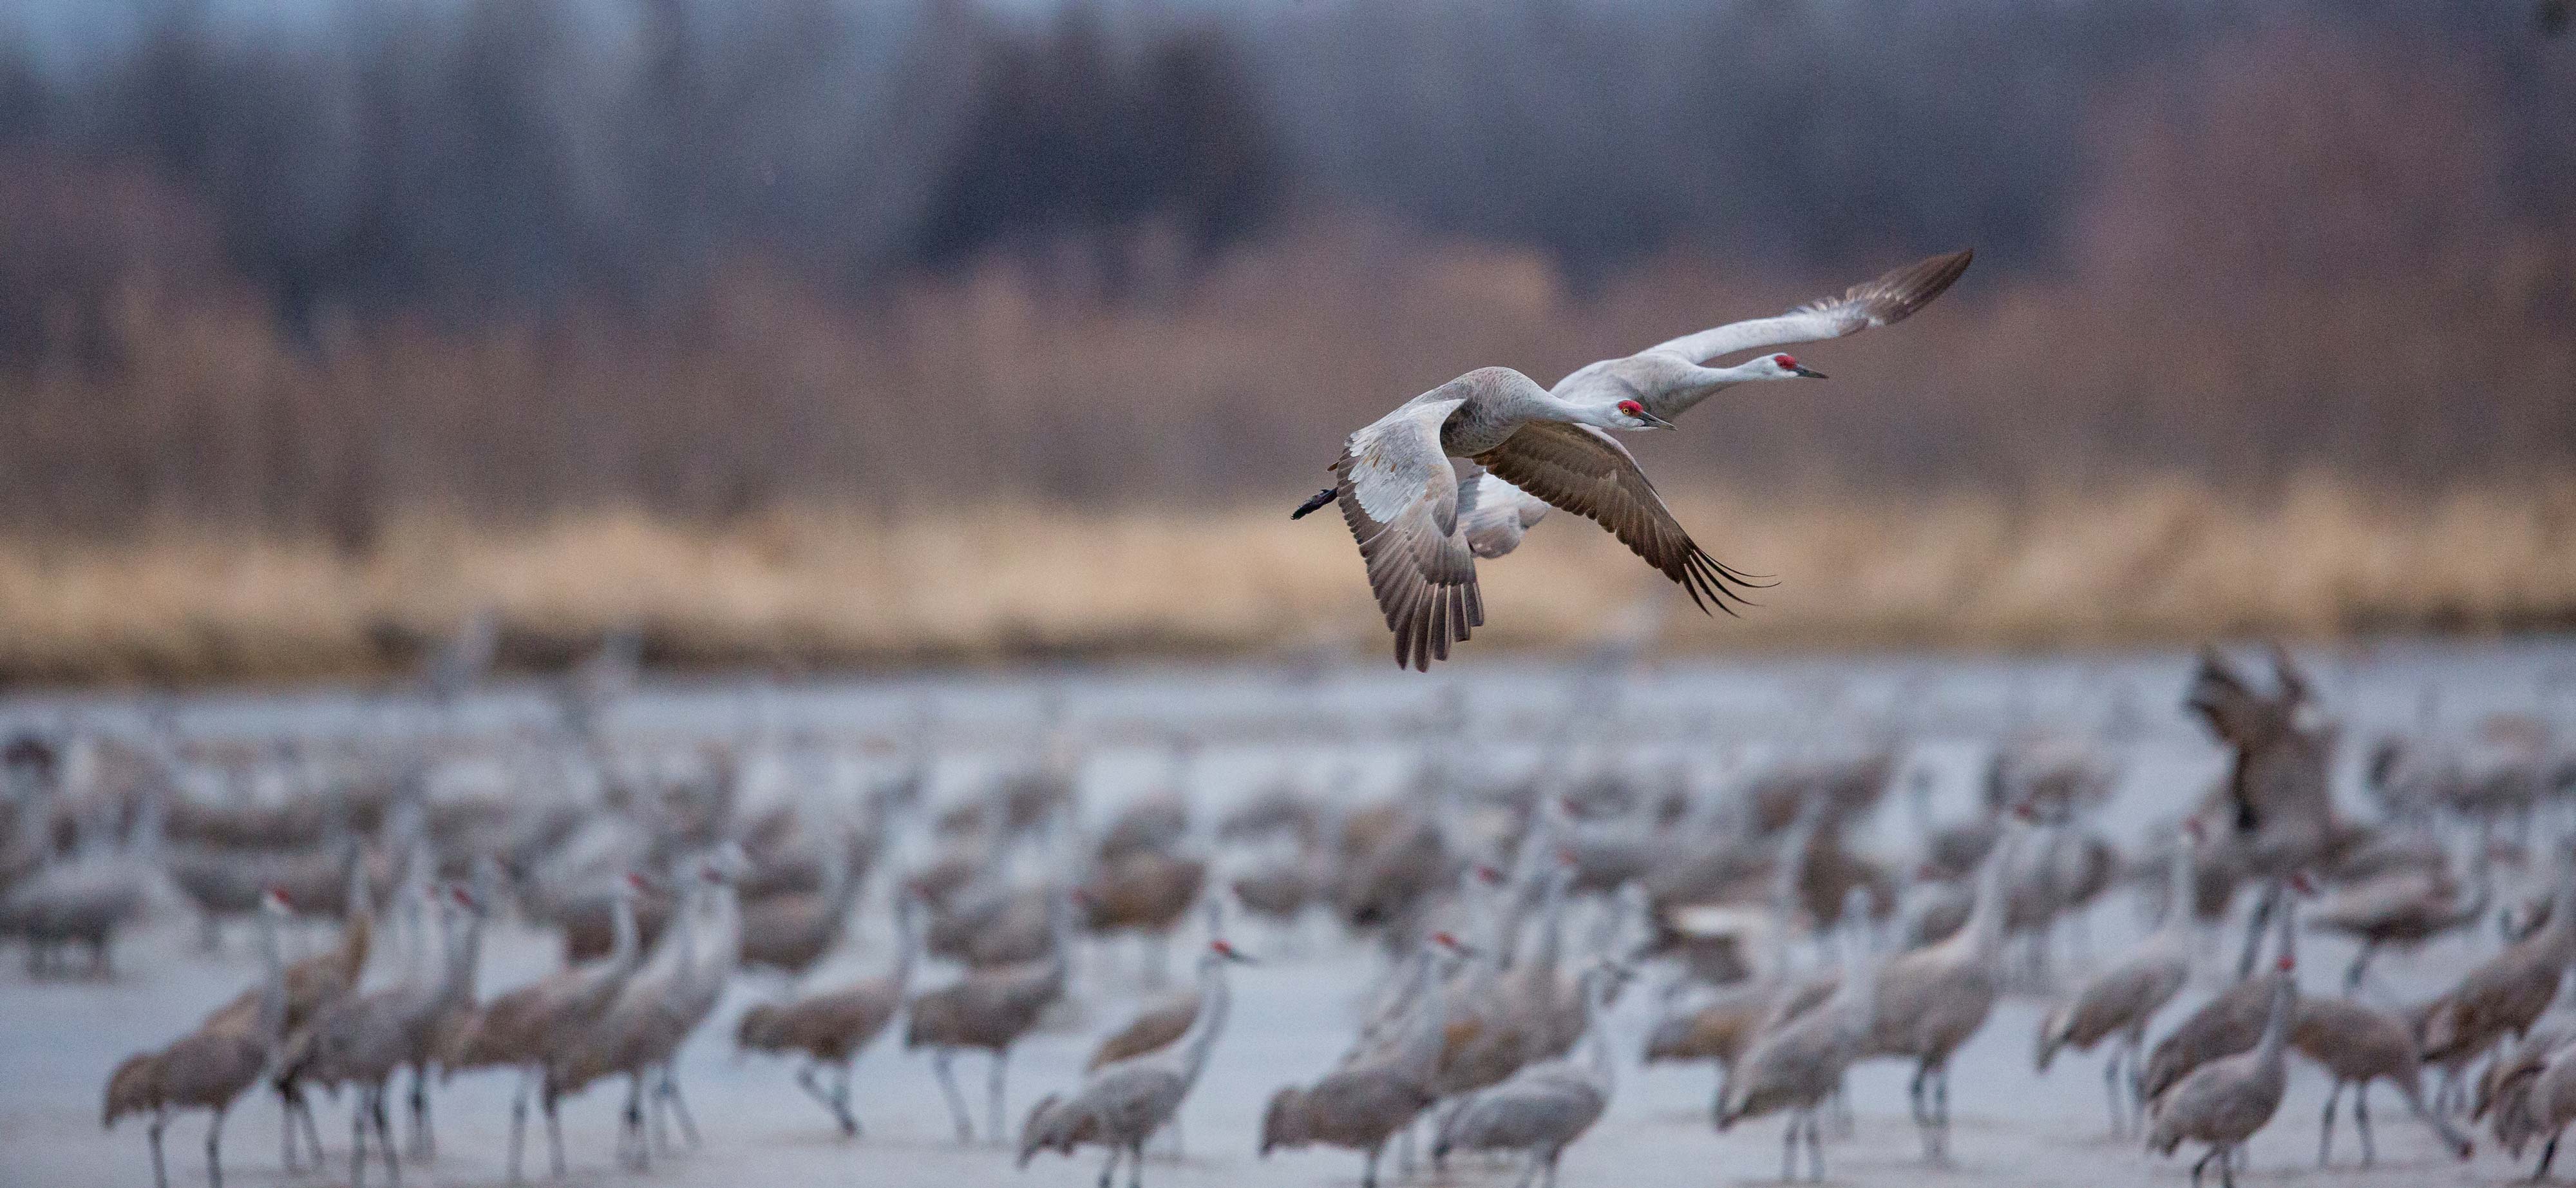 A sandhill crane comes in for a landing